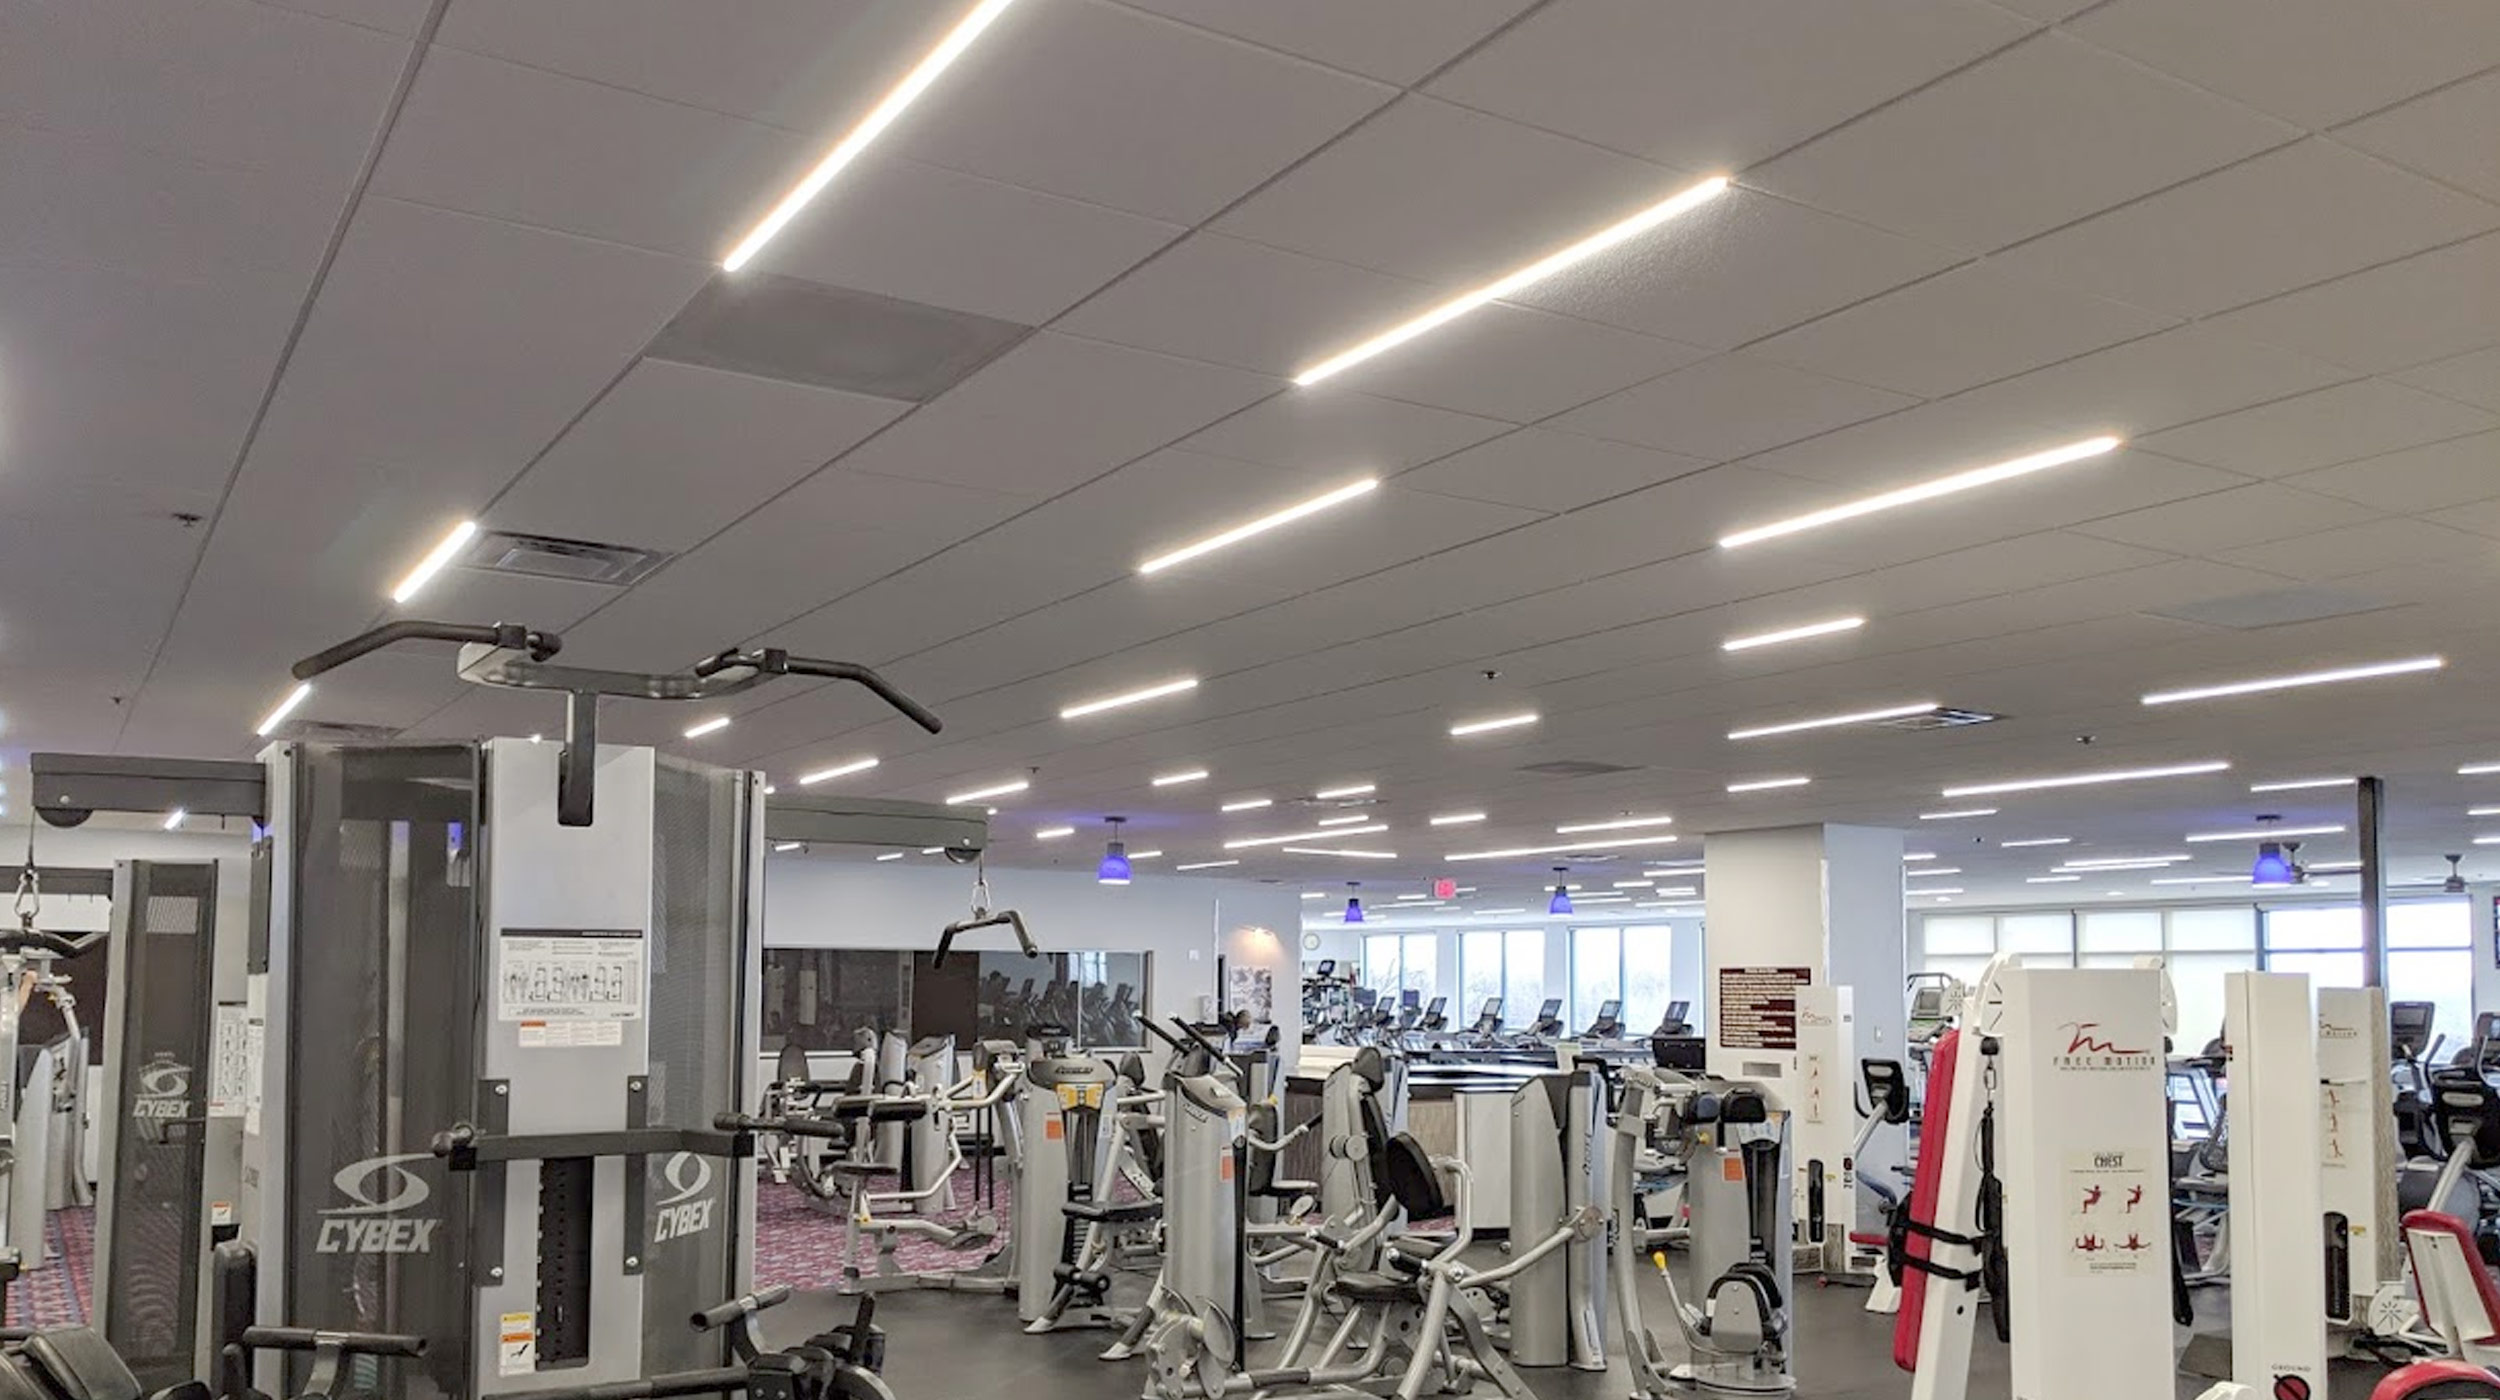  Airelight™ Linear SC 0.5 Directly Attached to T-Bar Grid Ceiling 